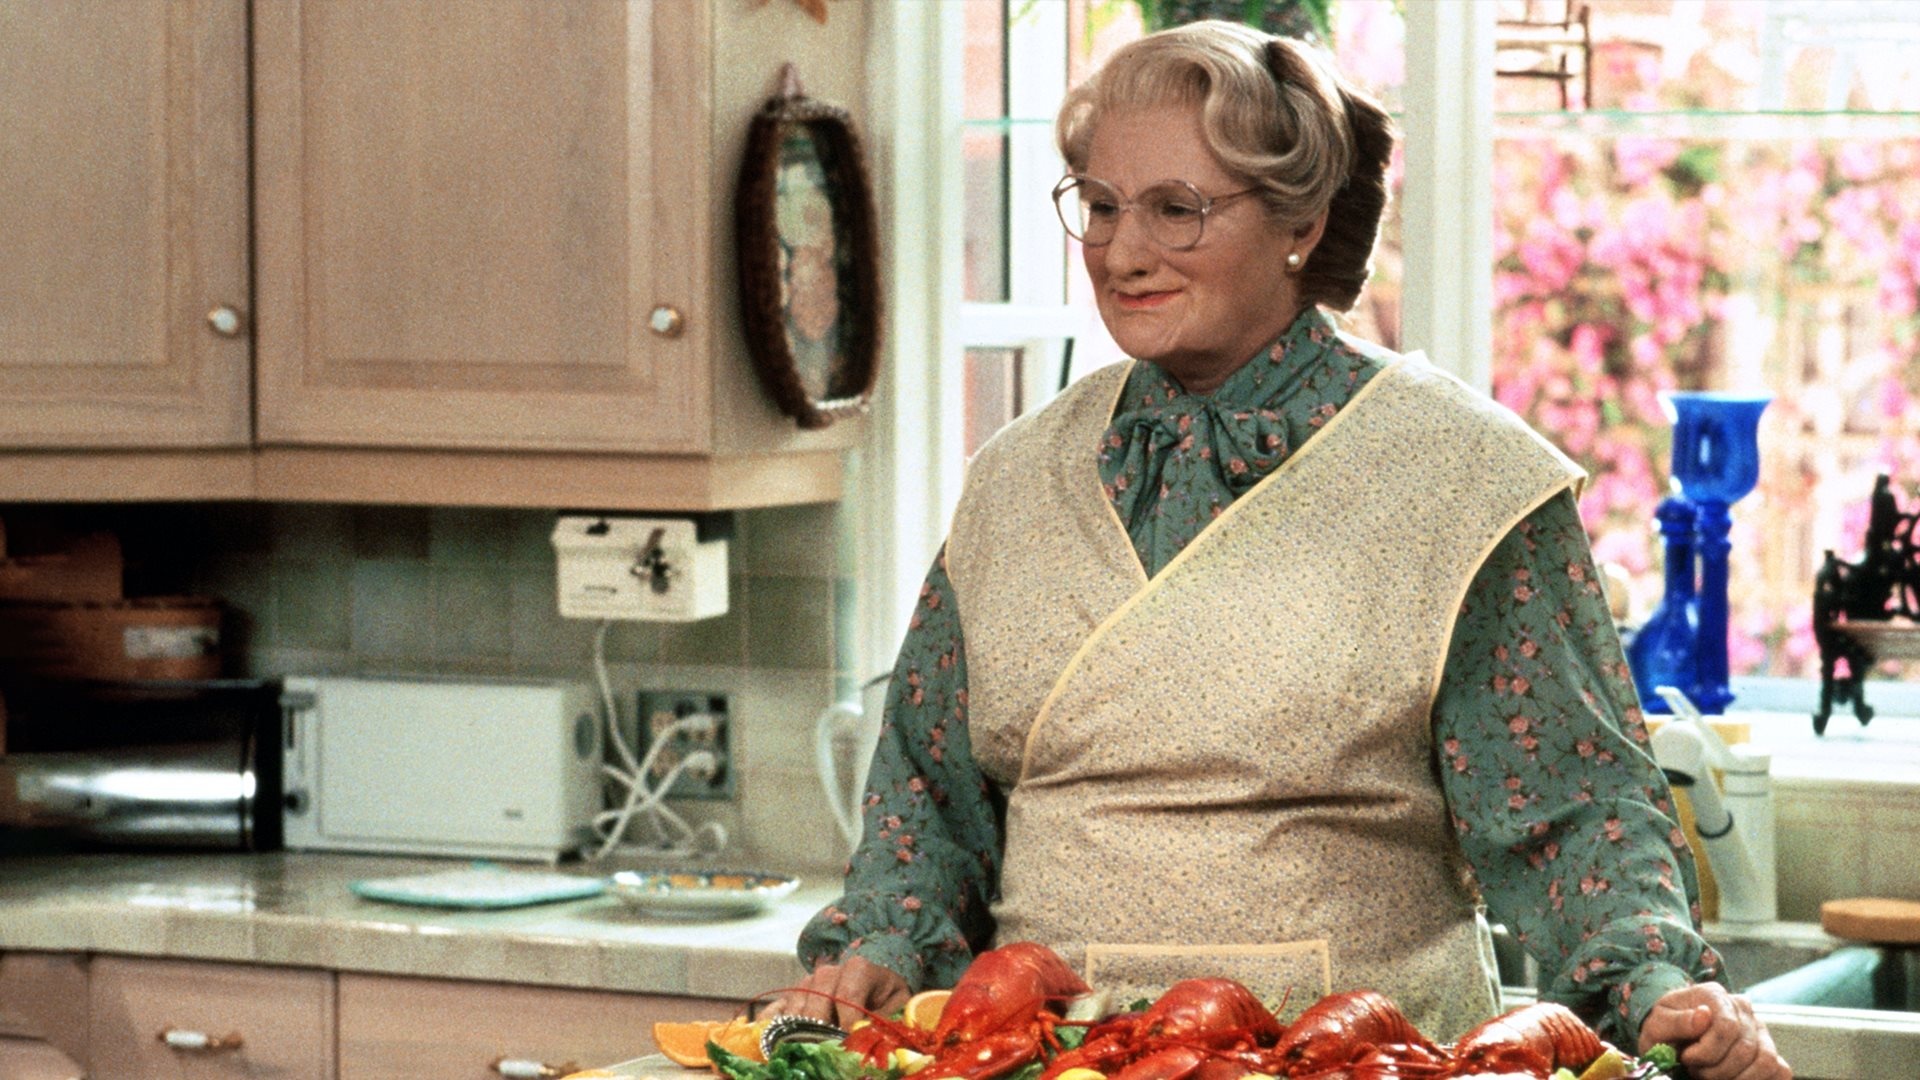 Mrs. Doubtfire wallpapers, Posted by Christopher, Top backgrounds, Fan favorites, 1920x1080 Full HD Desktop